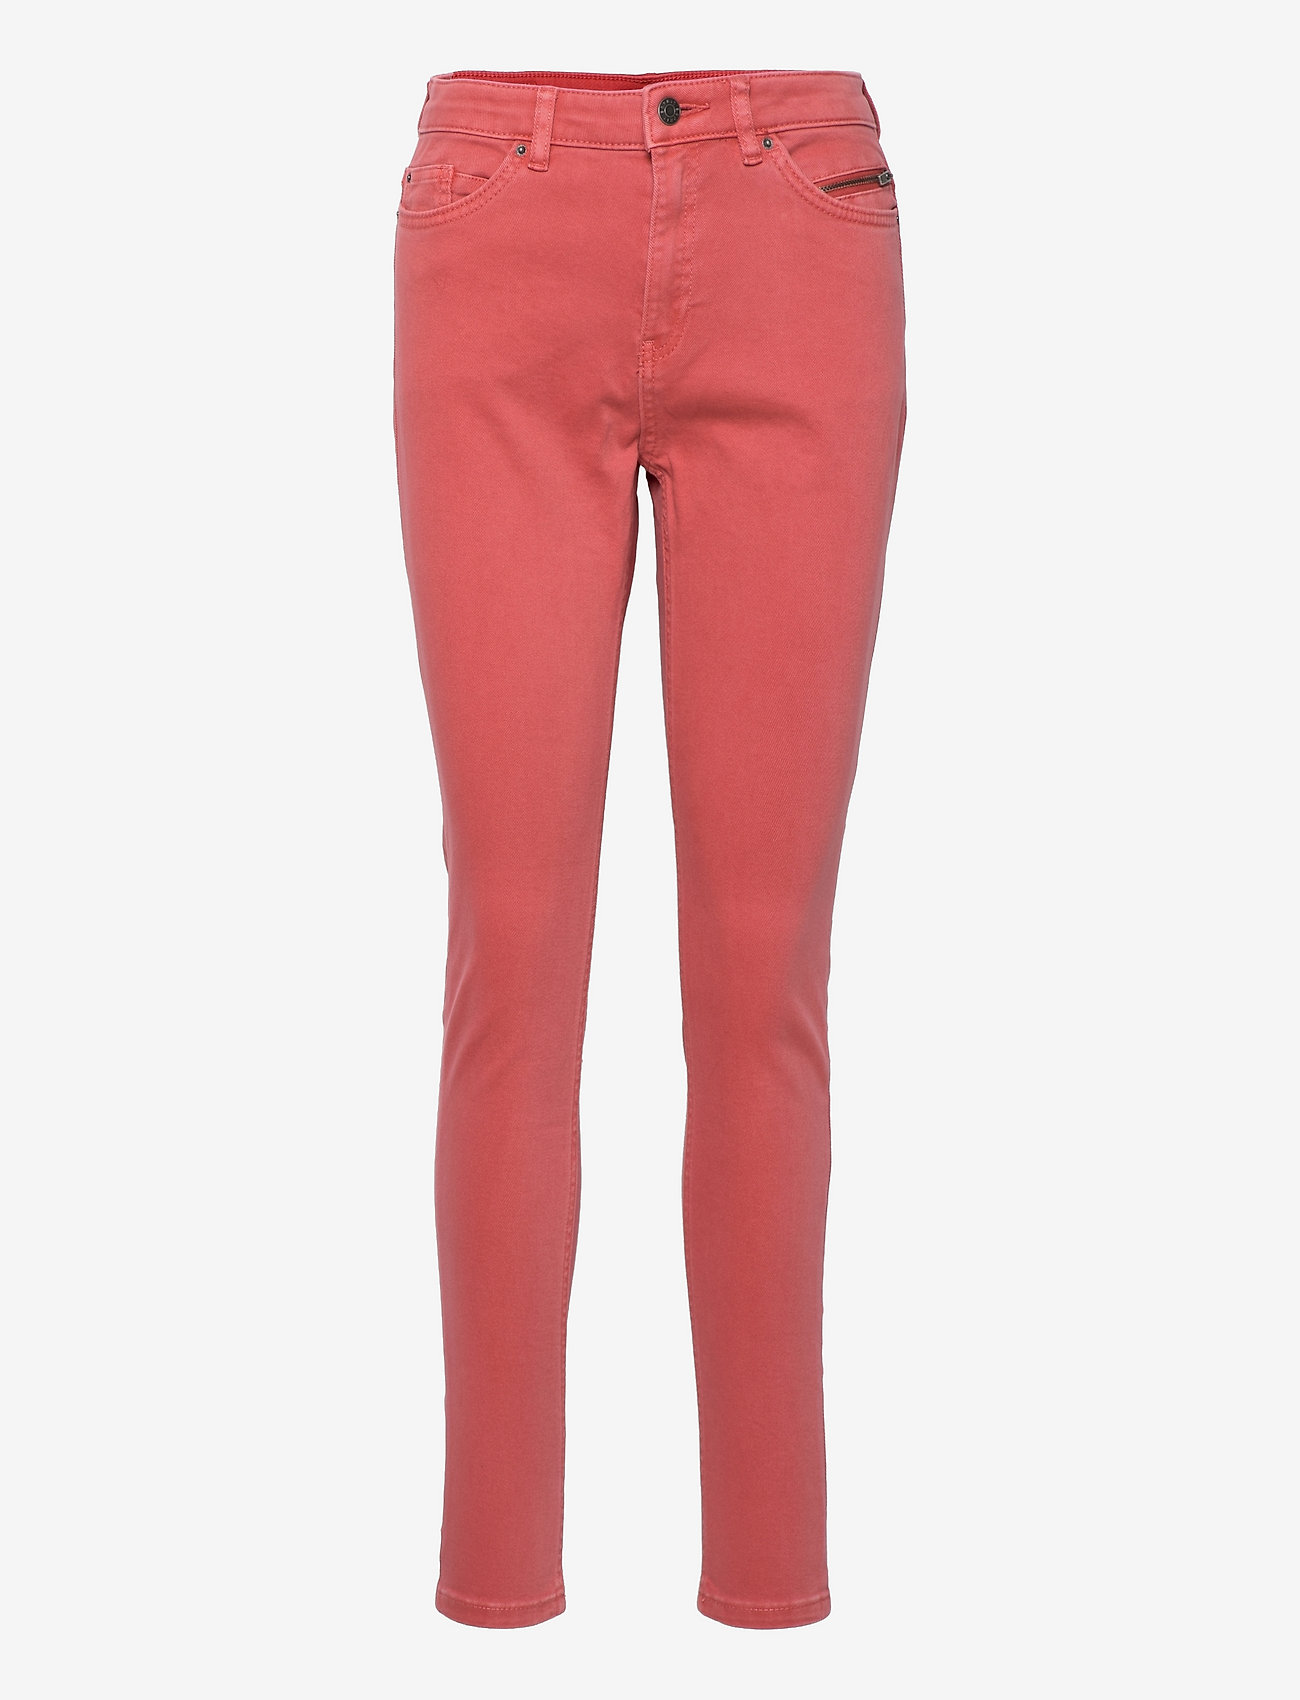 Esprit Casual - Stretch trousers with zip detail - slim fit jeans - coral - 0